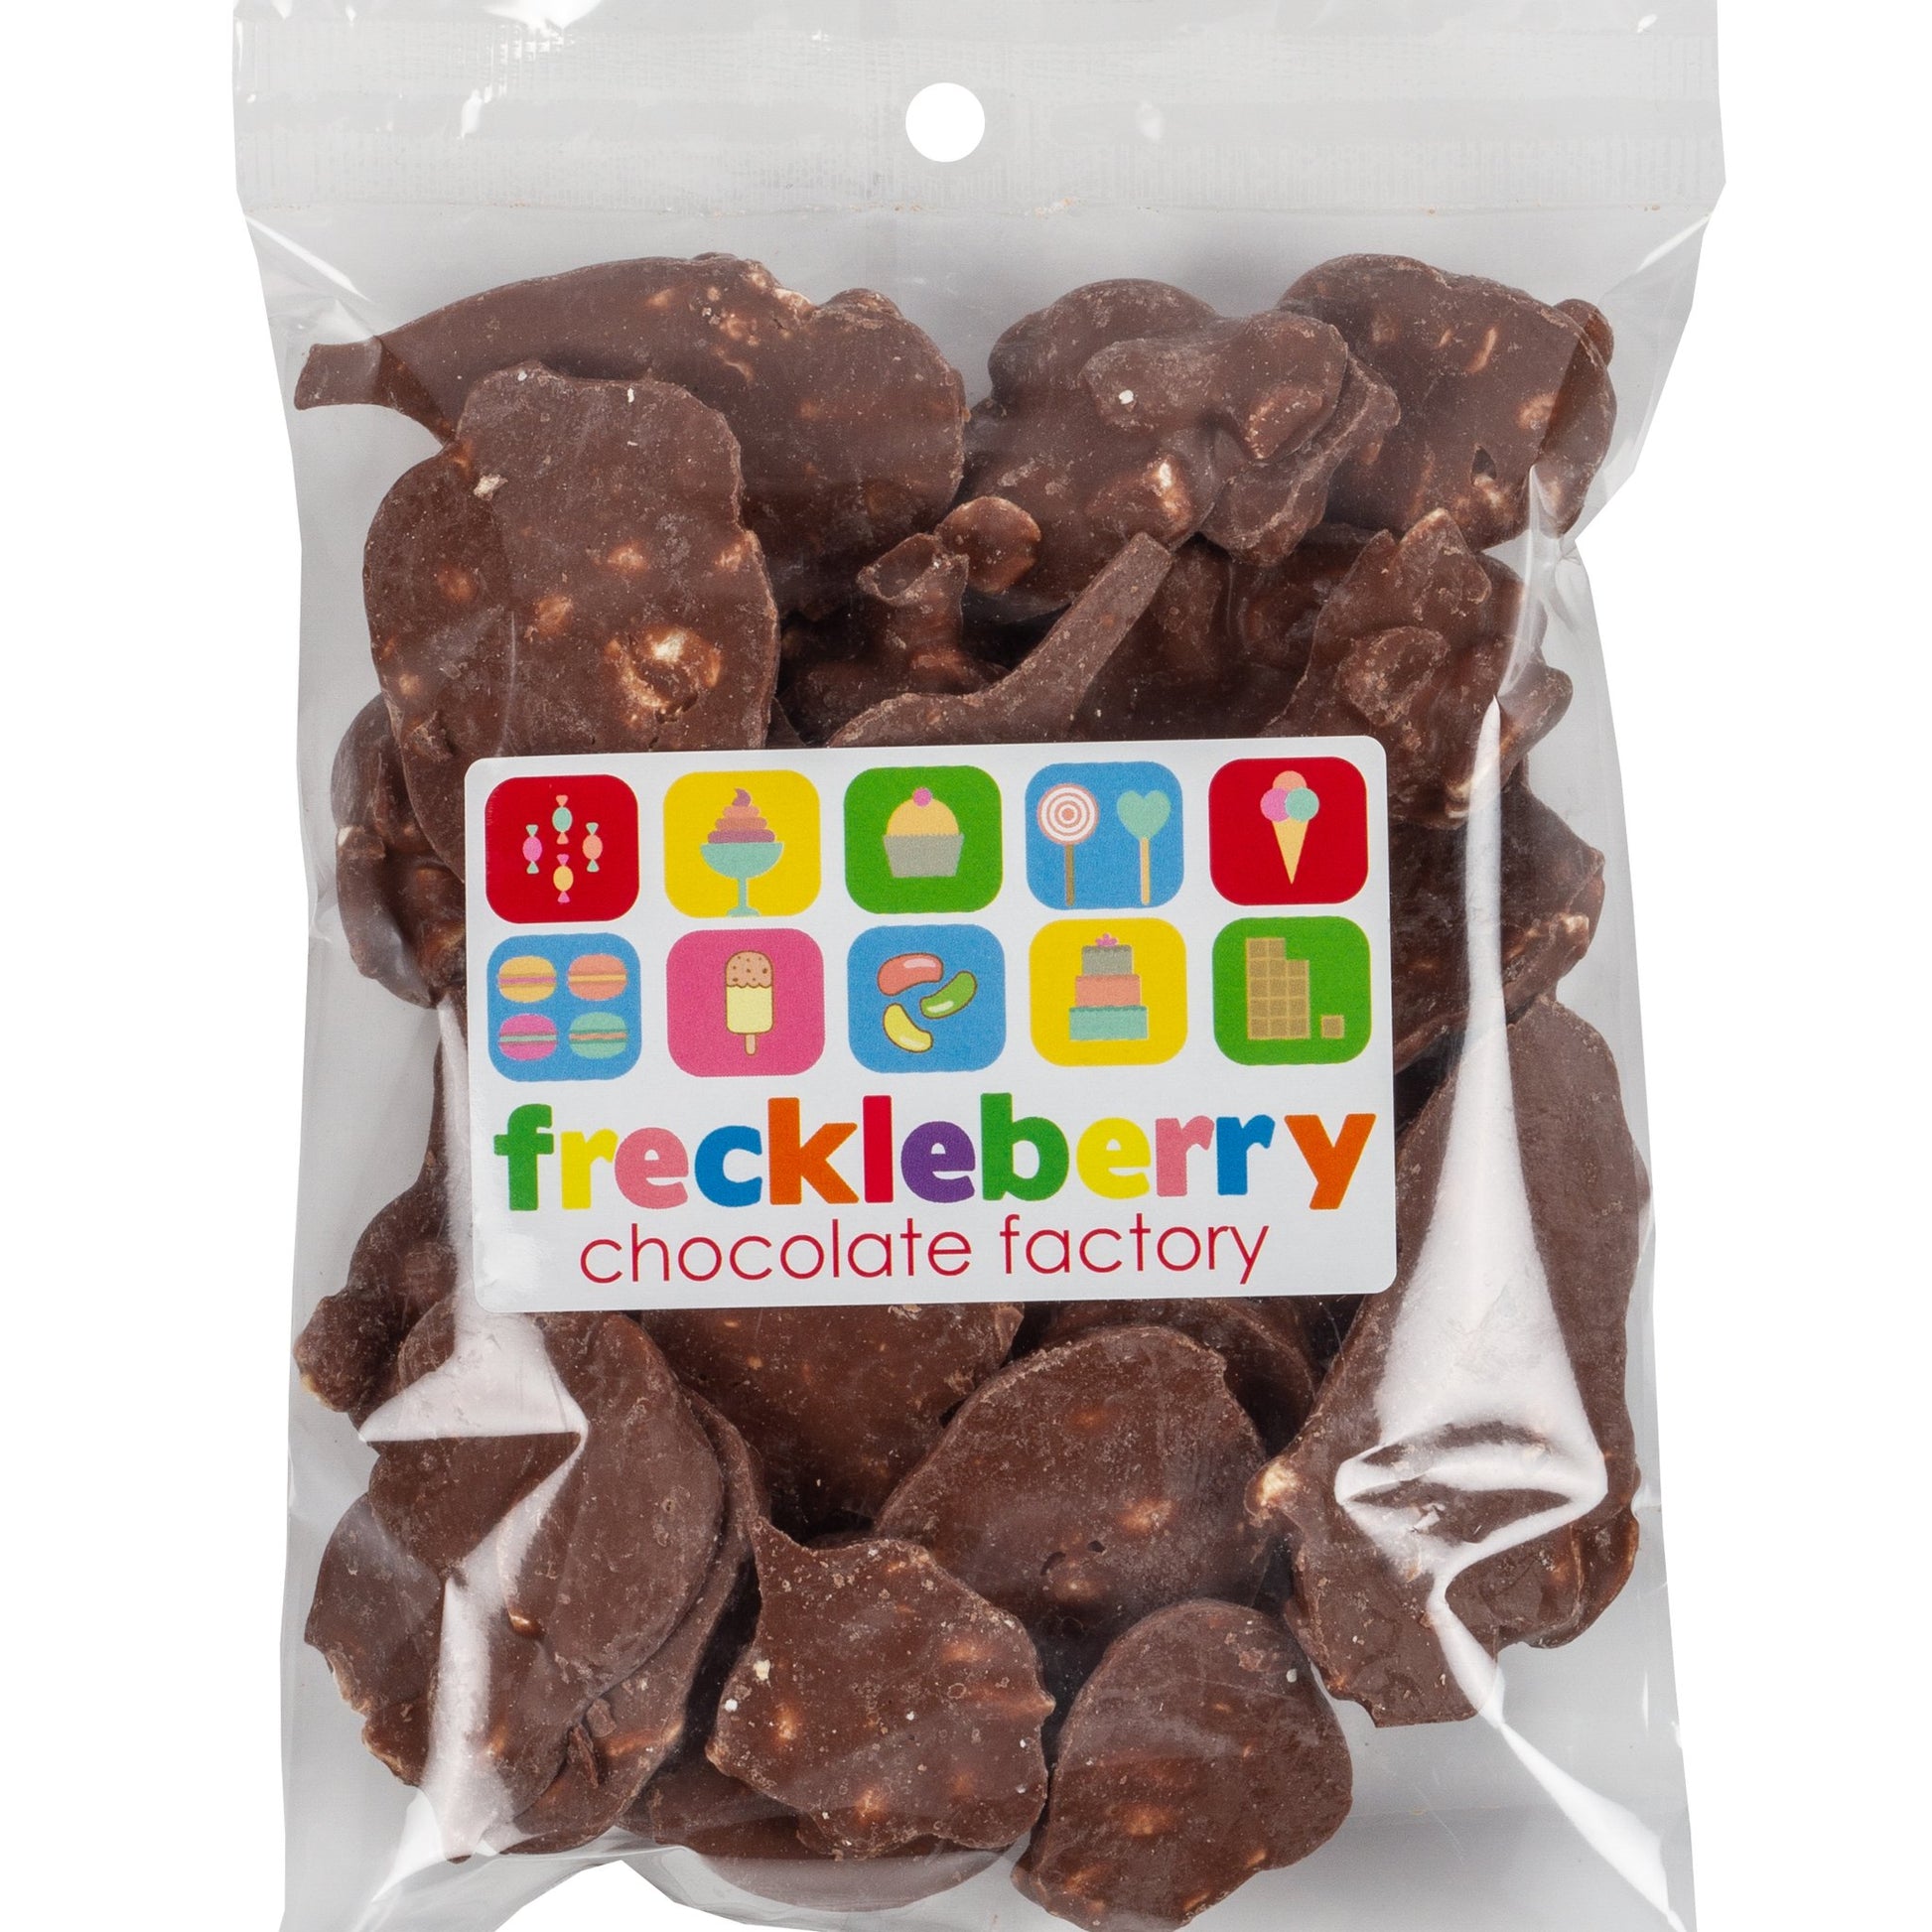 CHOC PEANUT CLUSTERS FRECKLEBERRY 230G - Gifts R Us